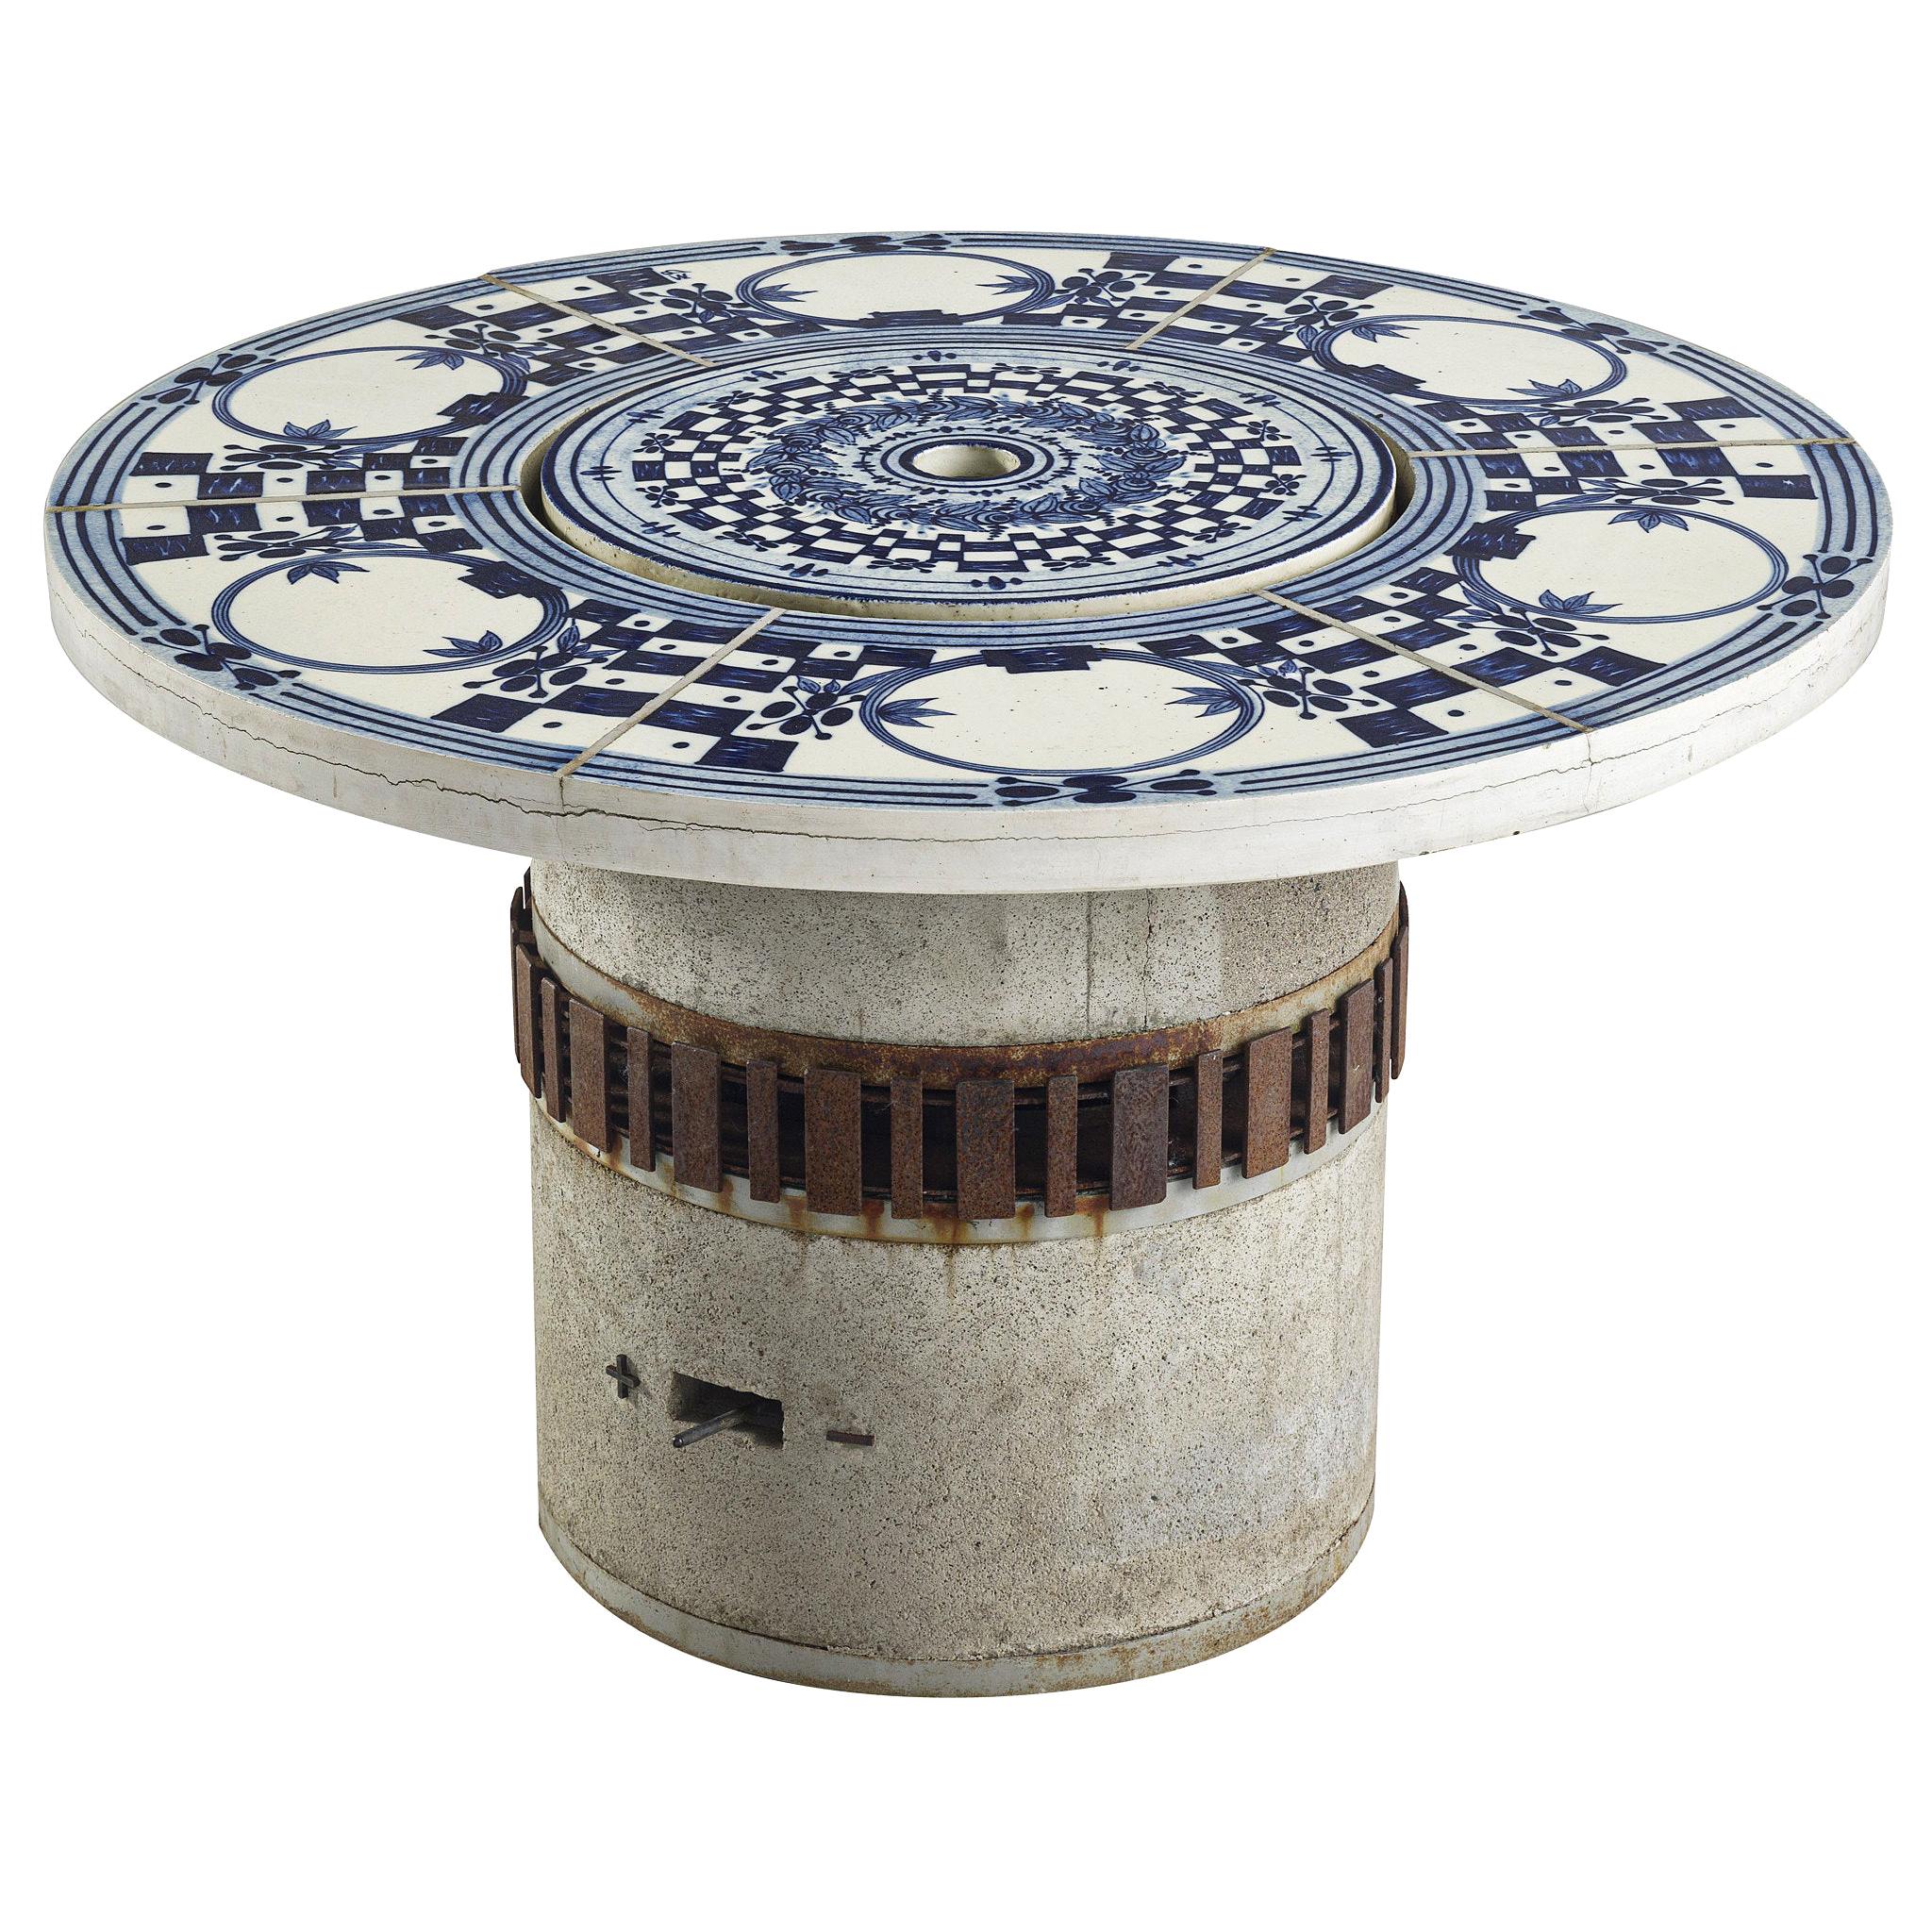 Bjørn Wiinblad 'Hibachi' Patio Grill Table with Hand Painted Ceramic Top